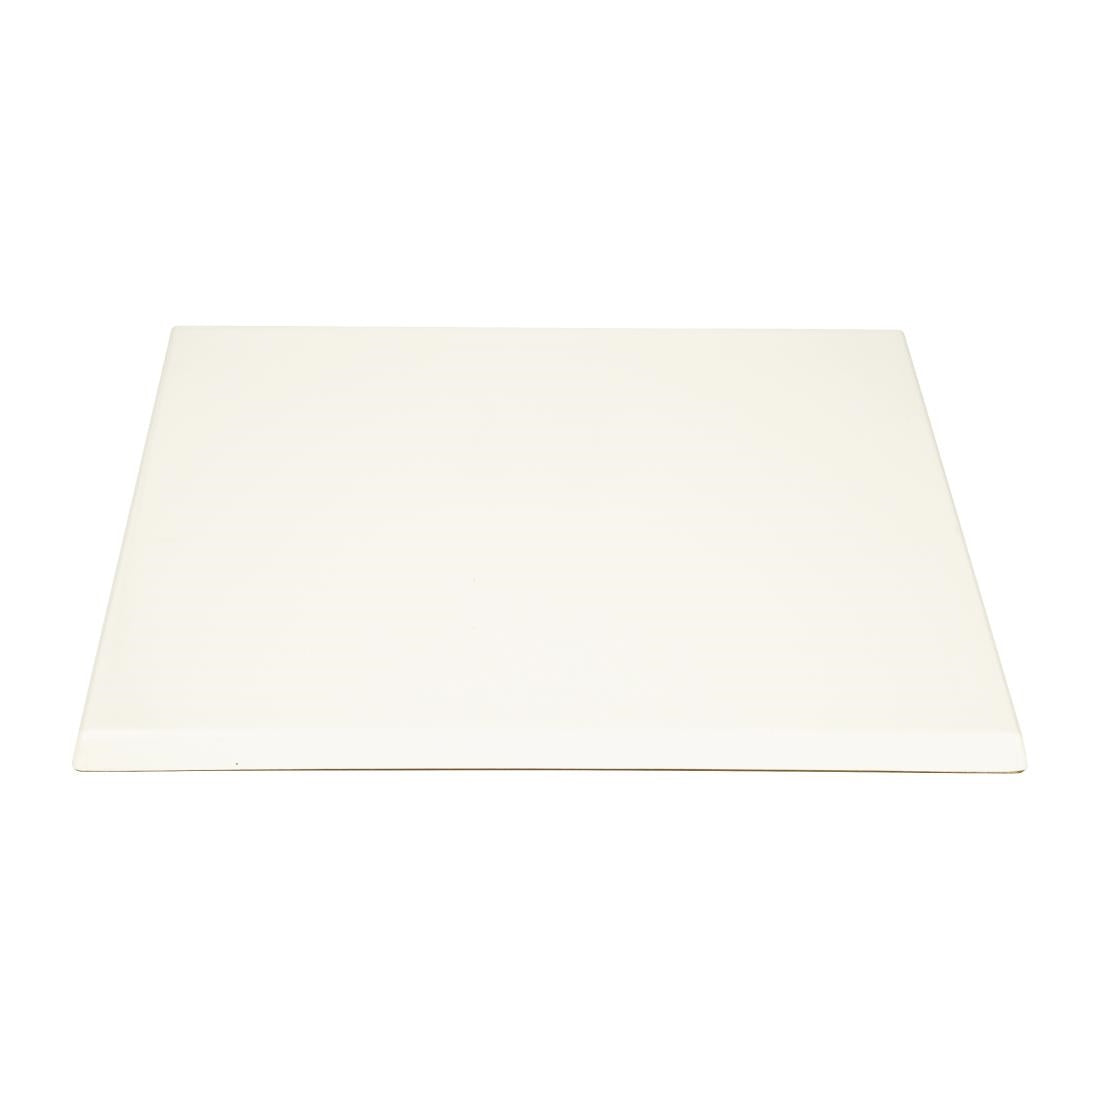 GG641 Bolero Pre-drilled Square Table Top White 700mm JD Catering Equipment Solutions Ltd